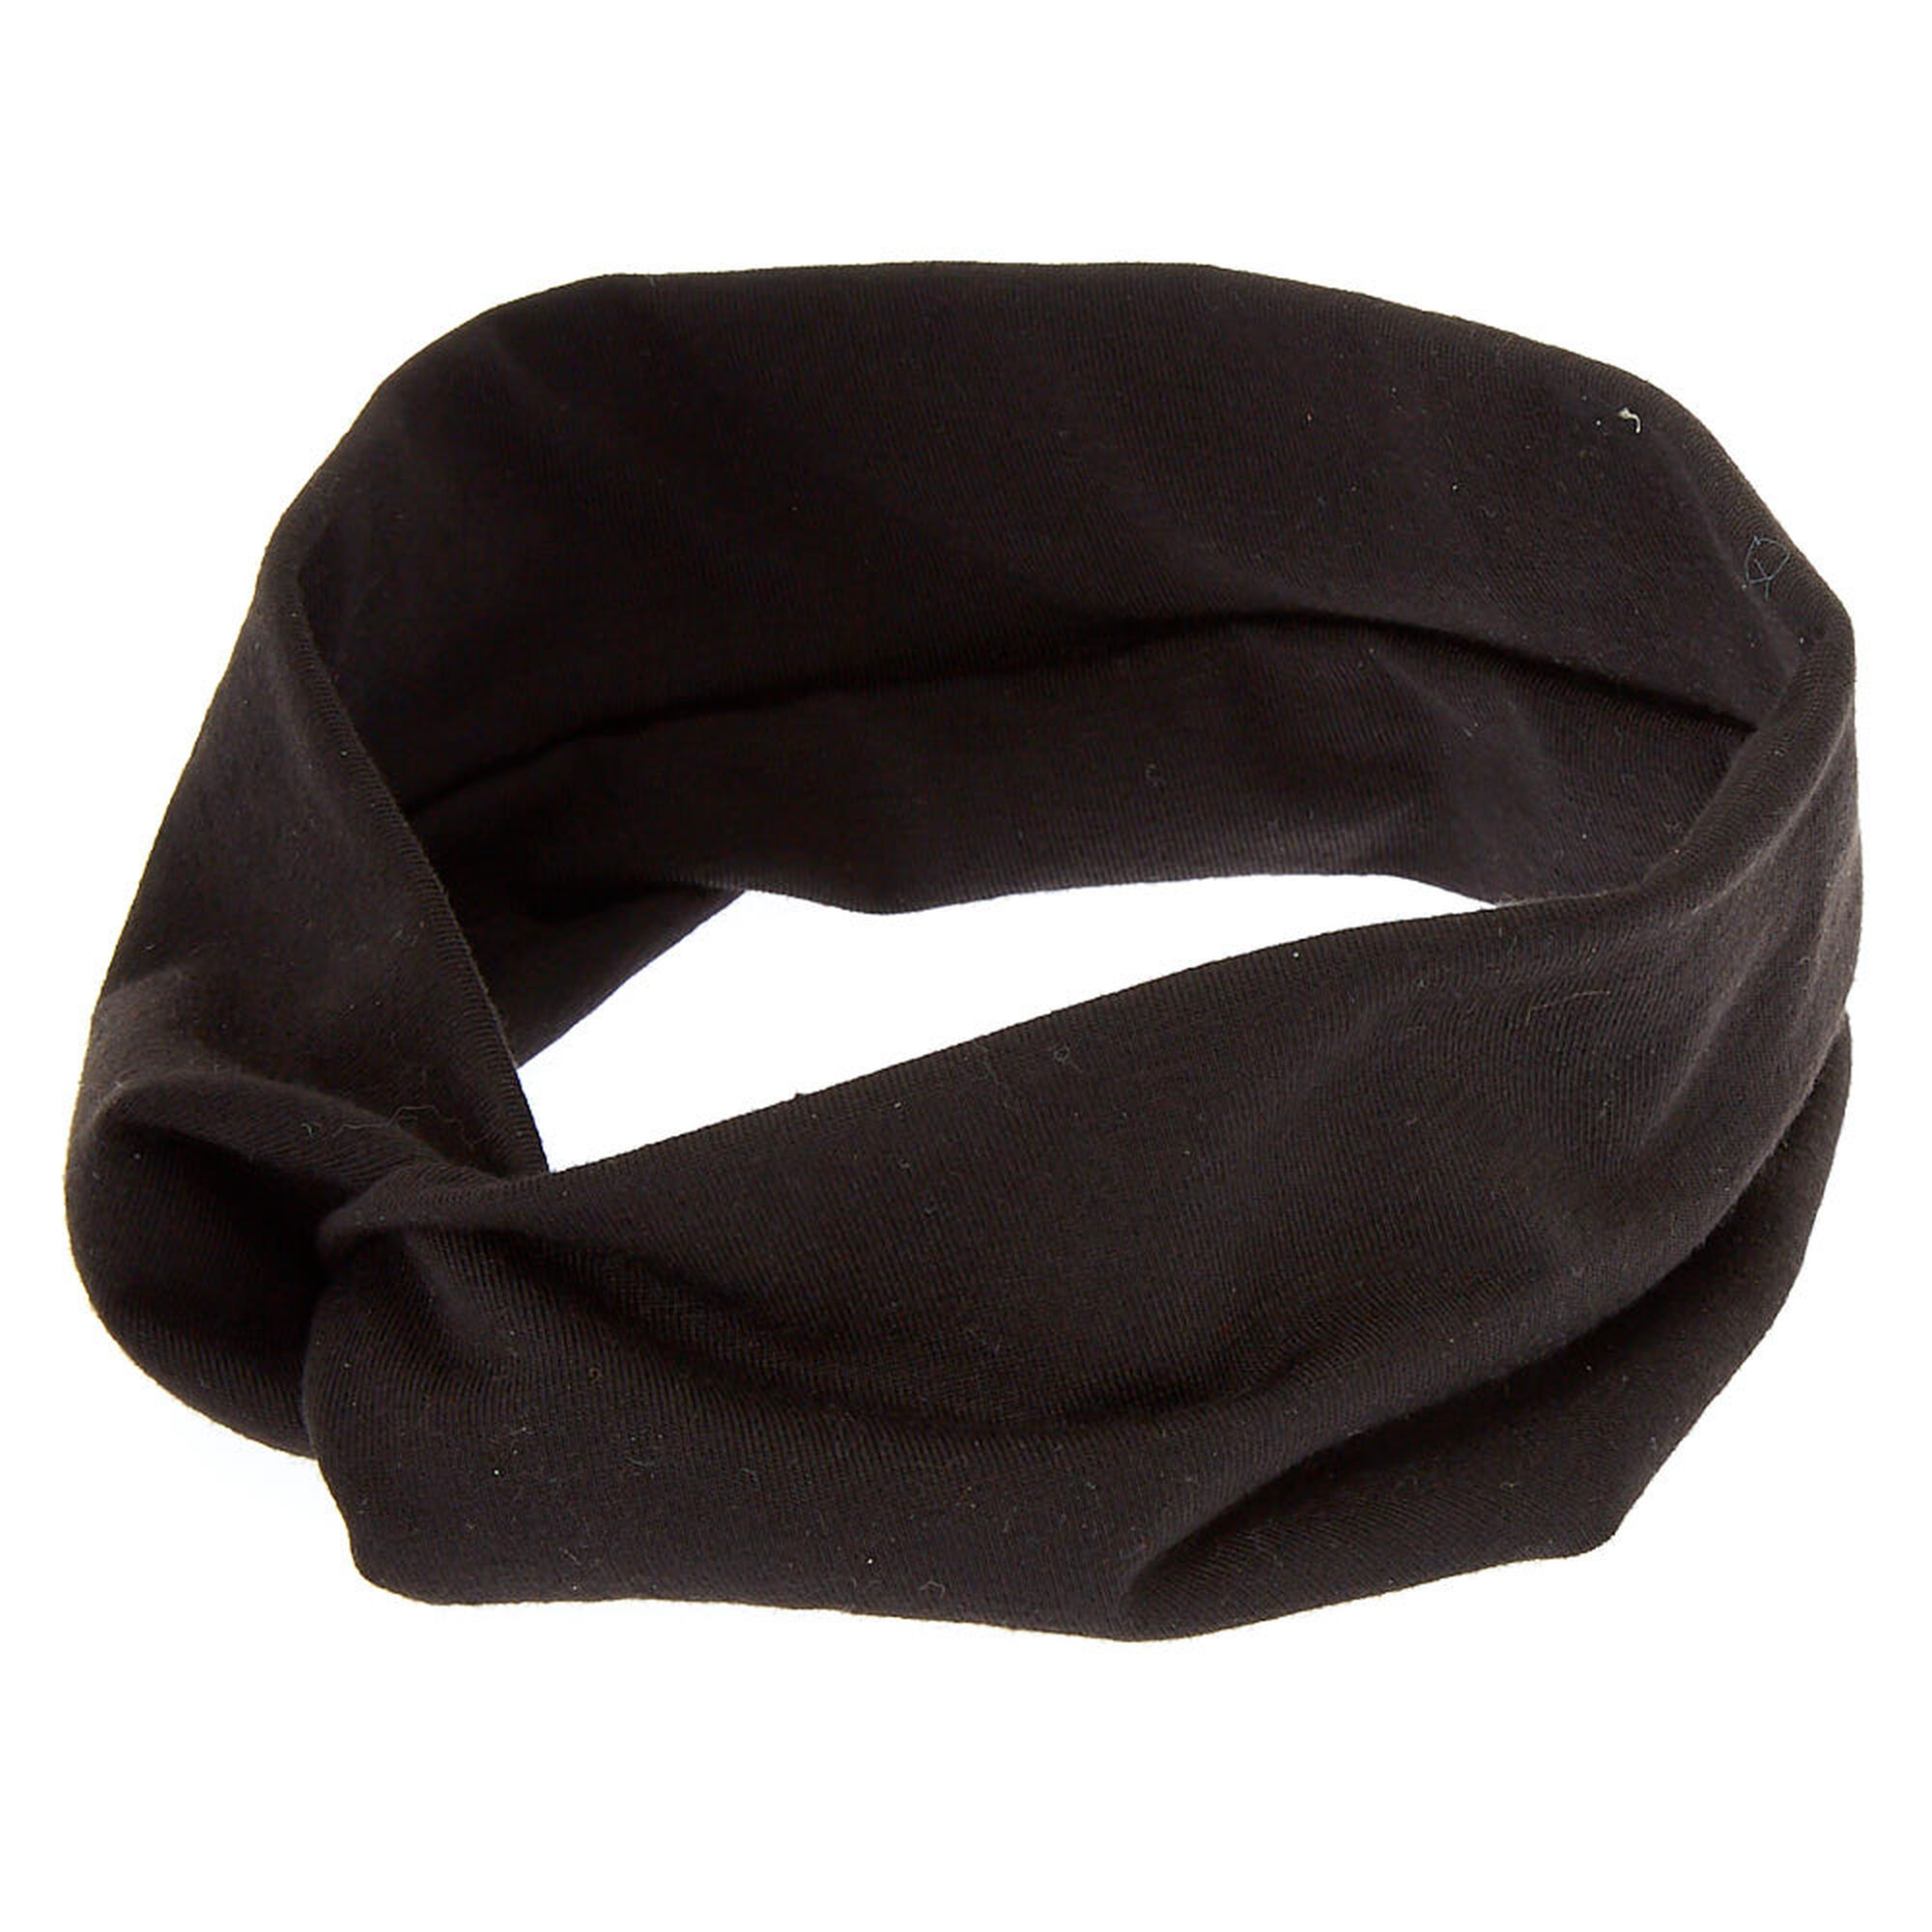 claire's wide jersey twisted headwrap - black